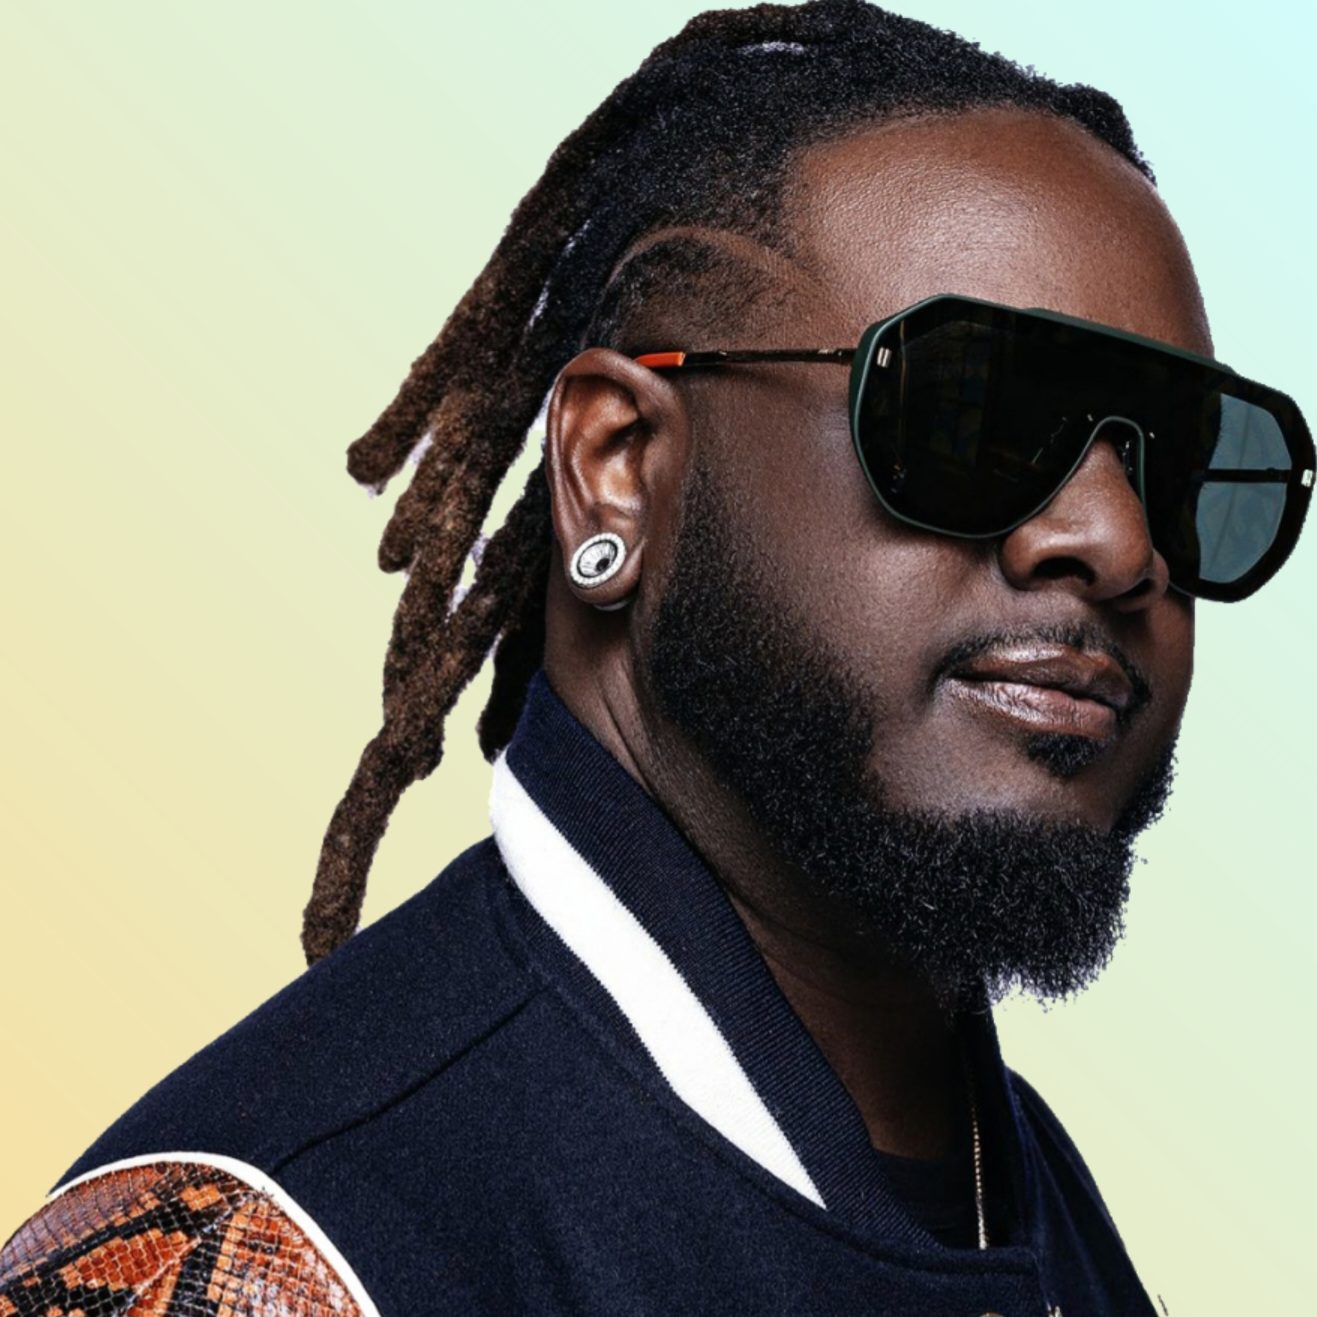 Rapper T-Pain's bodyguard detained at airport for gun in carry-on | Fox News